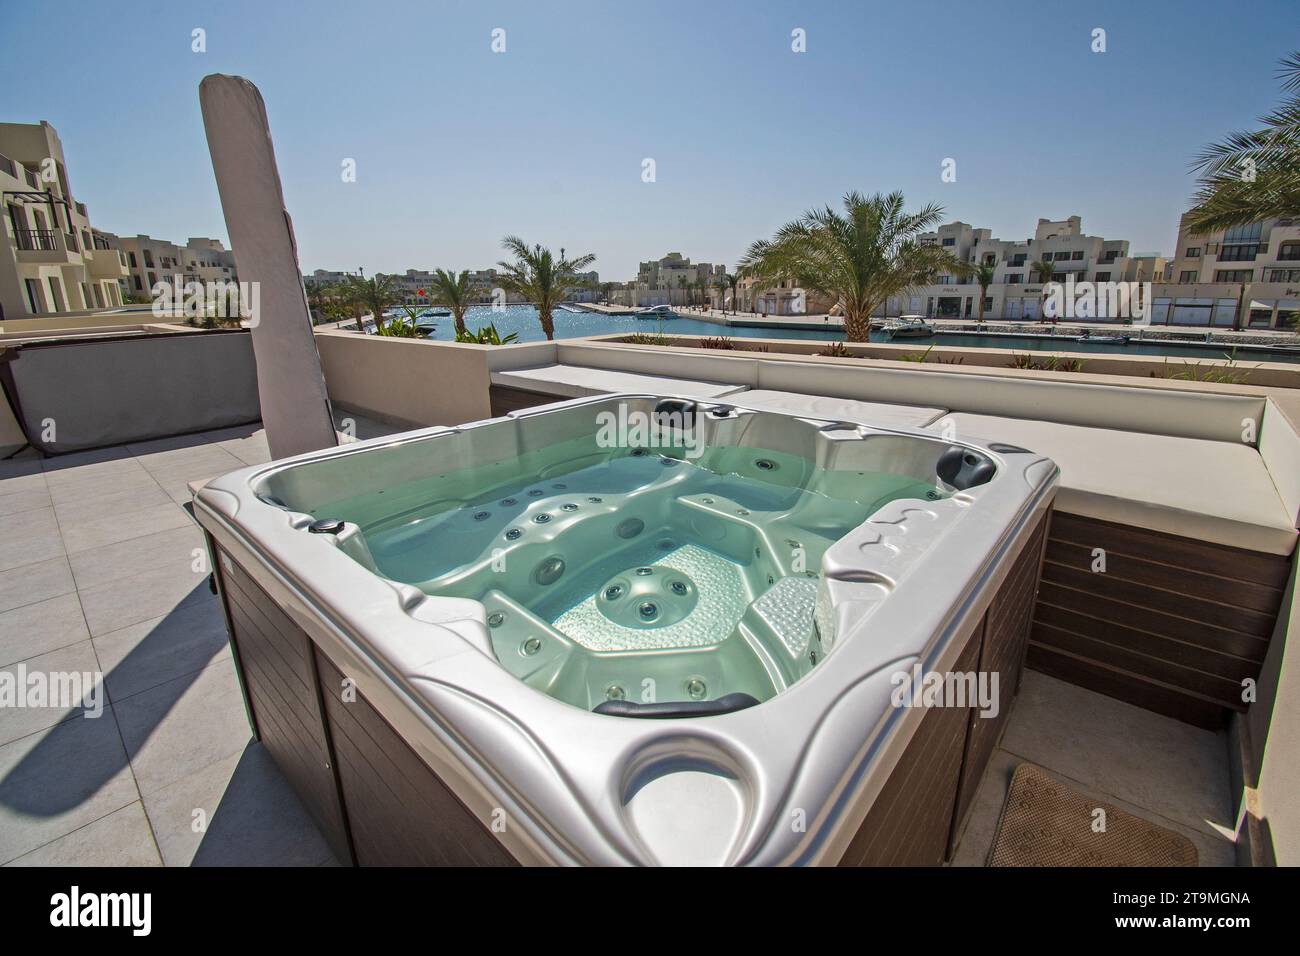 Roof terrace patio furniture at a luxury holiday villa in tropical resort with hot tub and marina view Stock Photo